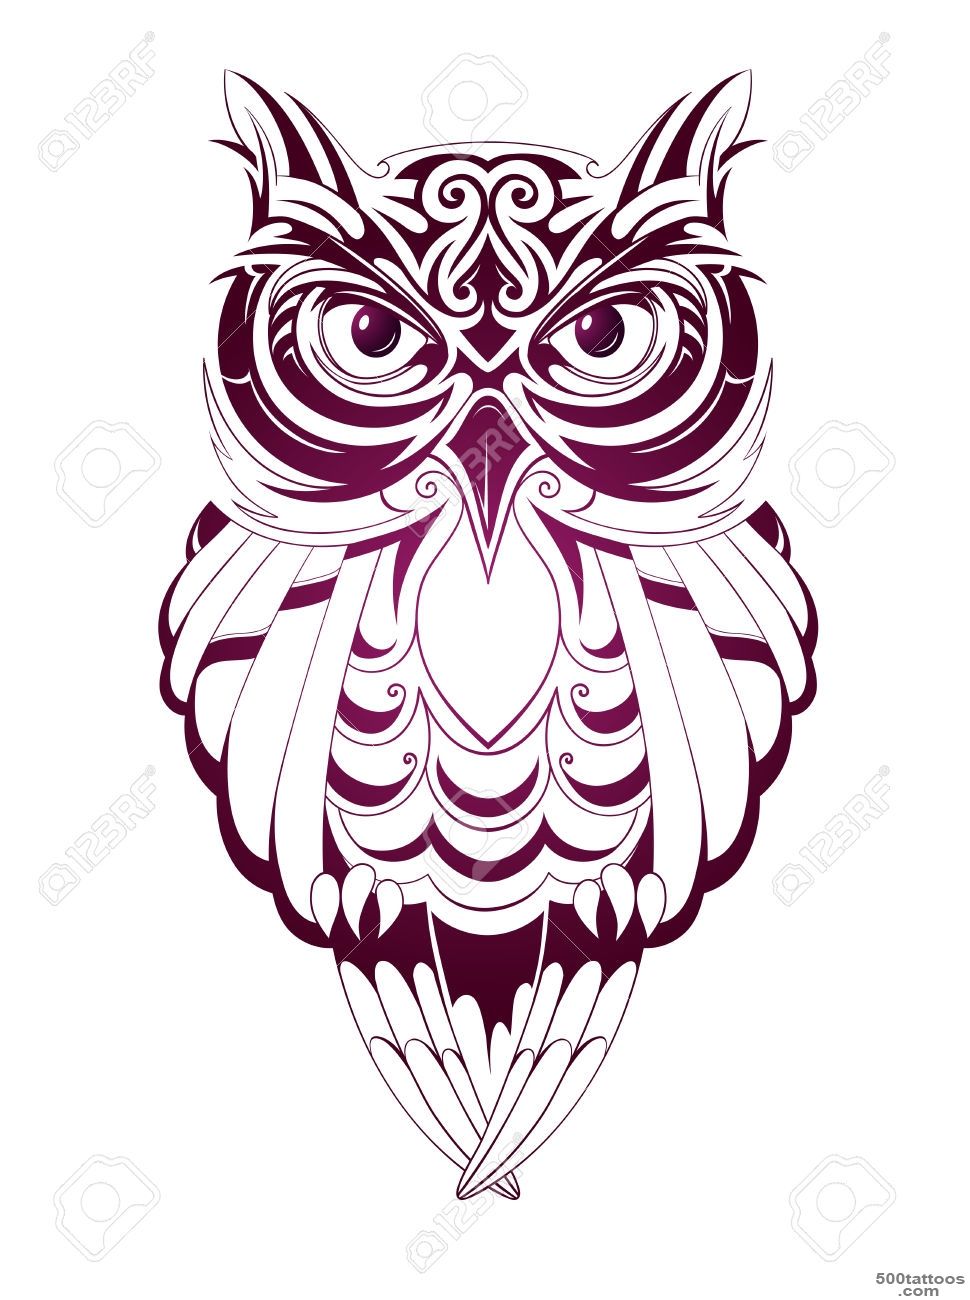 Owl Tattoo Stock Photos, Pictures, Royalty Free Owl Tattoo Images ..._14